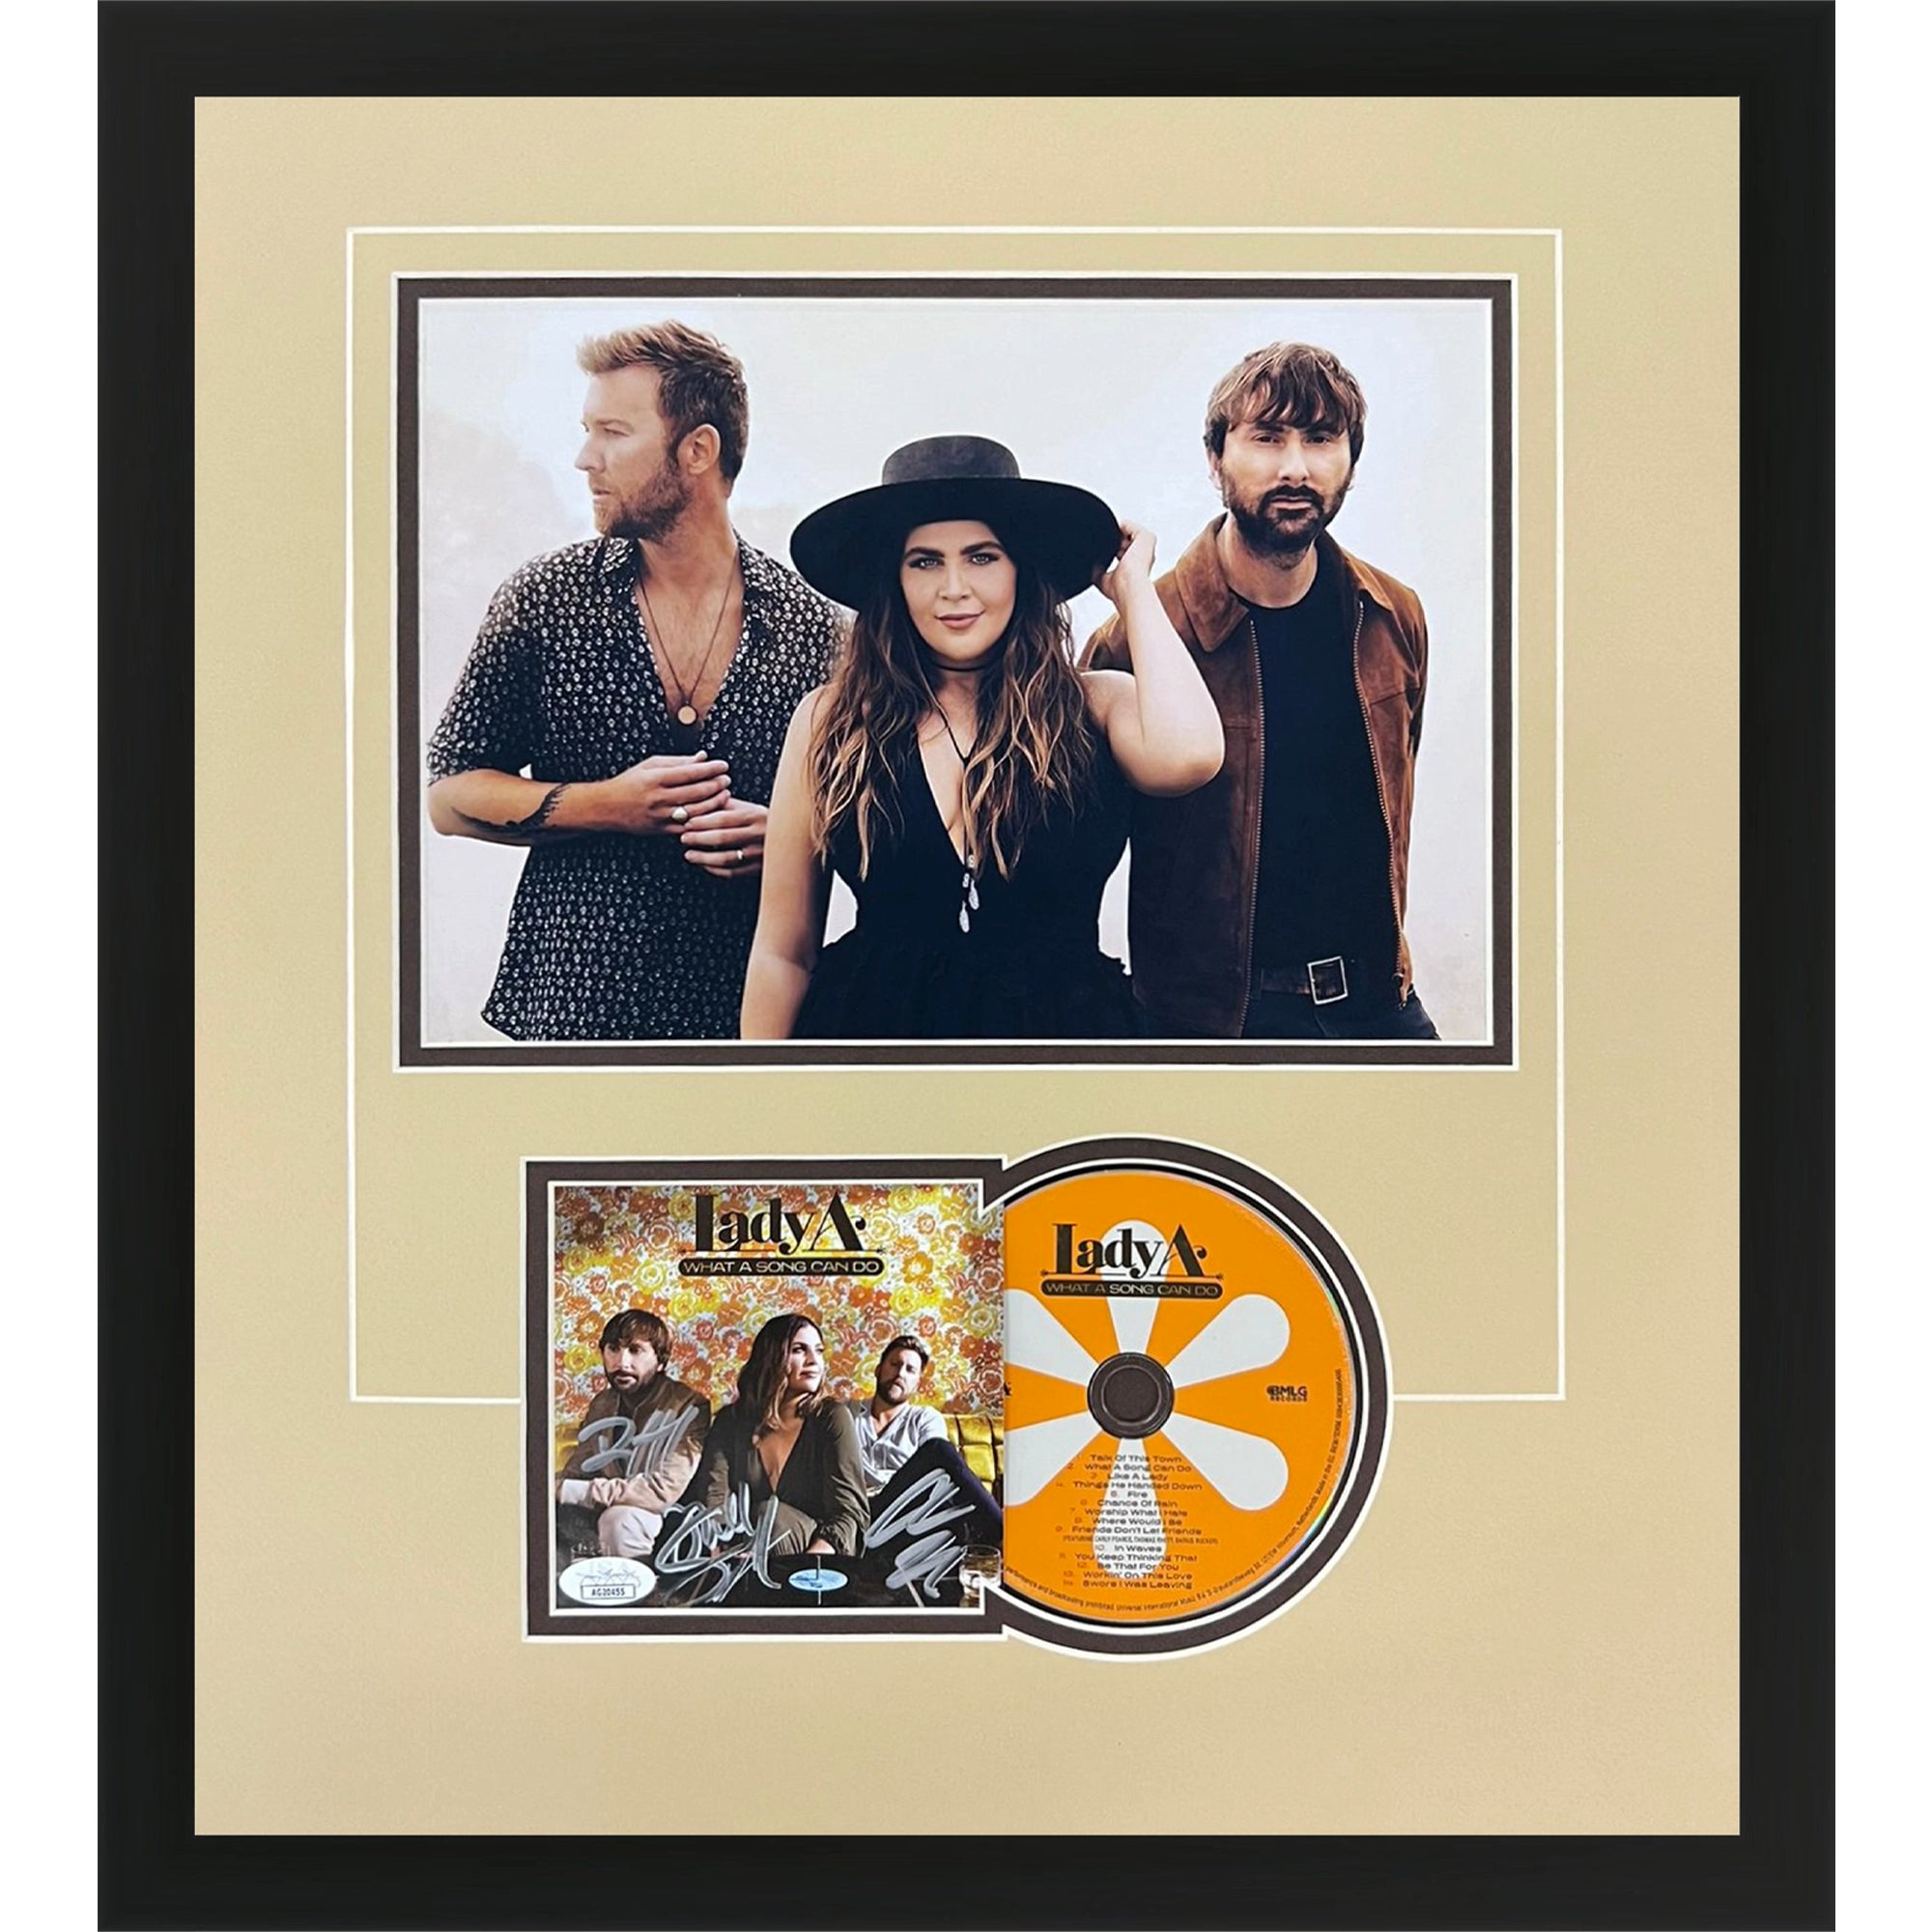 Lady Antebellum Autographed What A Song Can Do Deluxe Framed CD and Cover - JSA